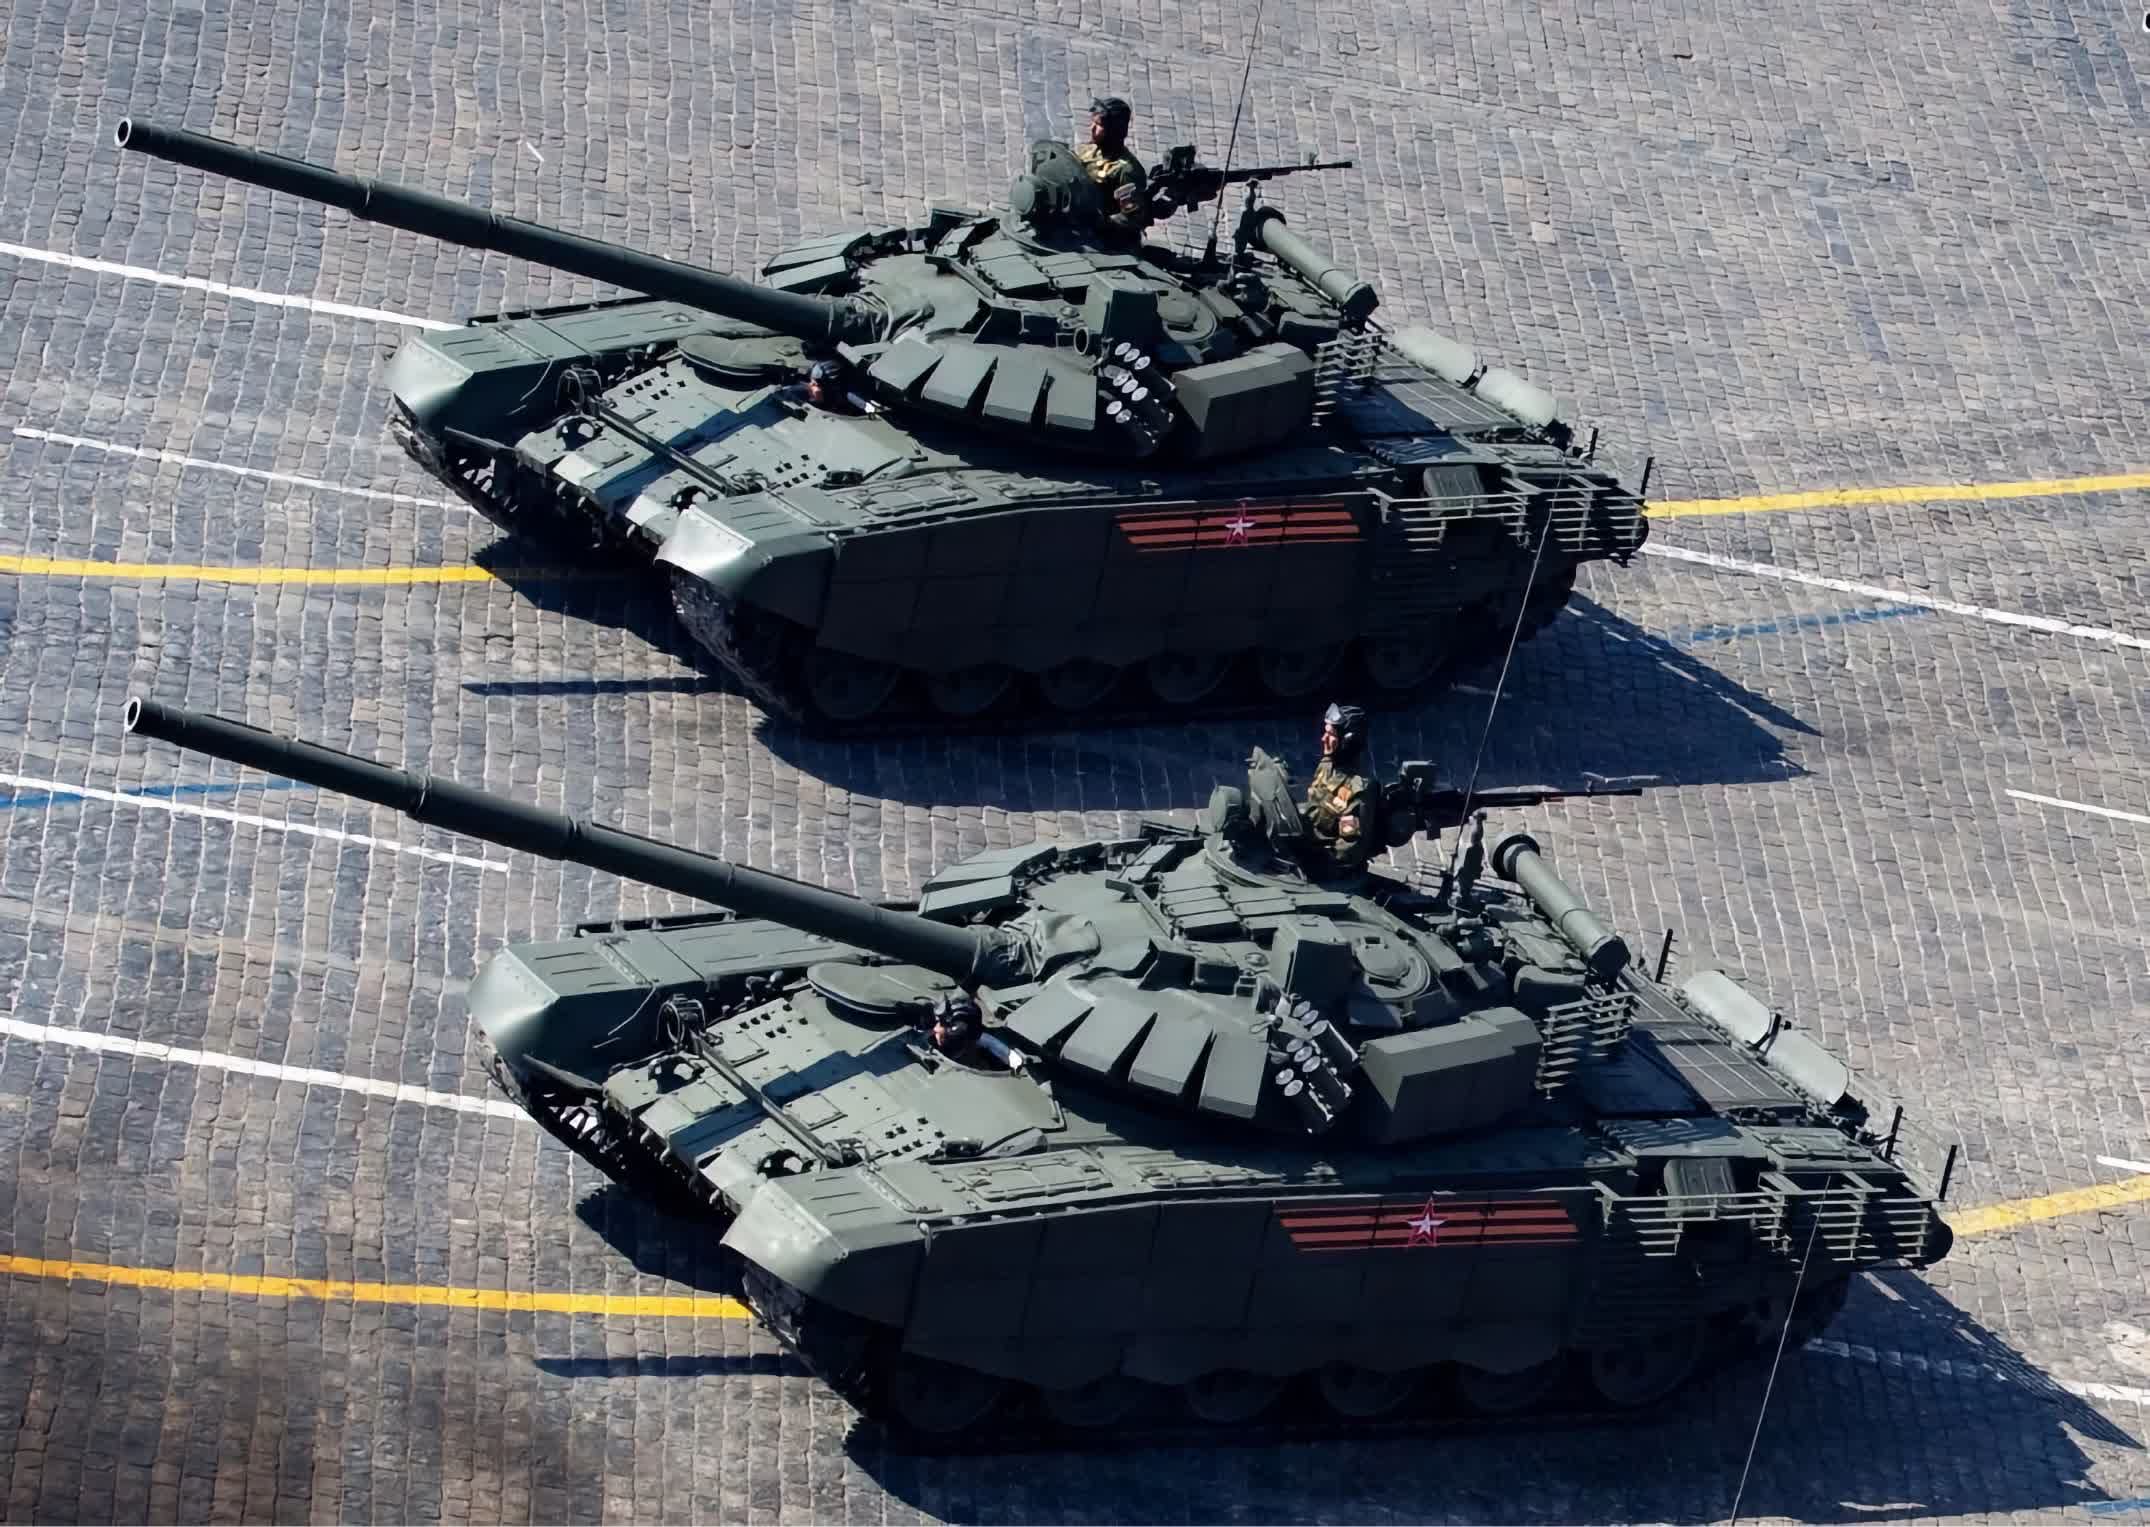 Russian tanks are using chips from household appliances due to sanctions